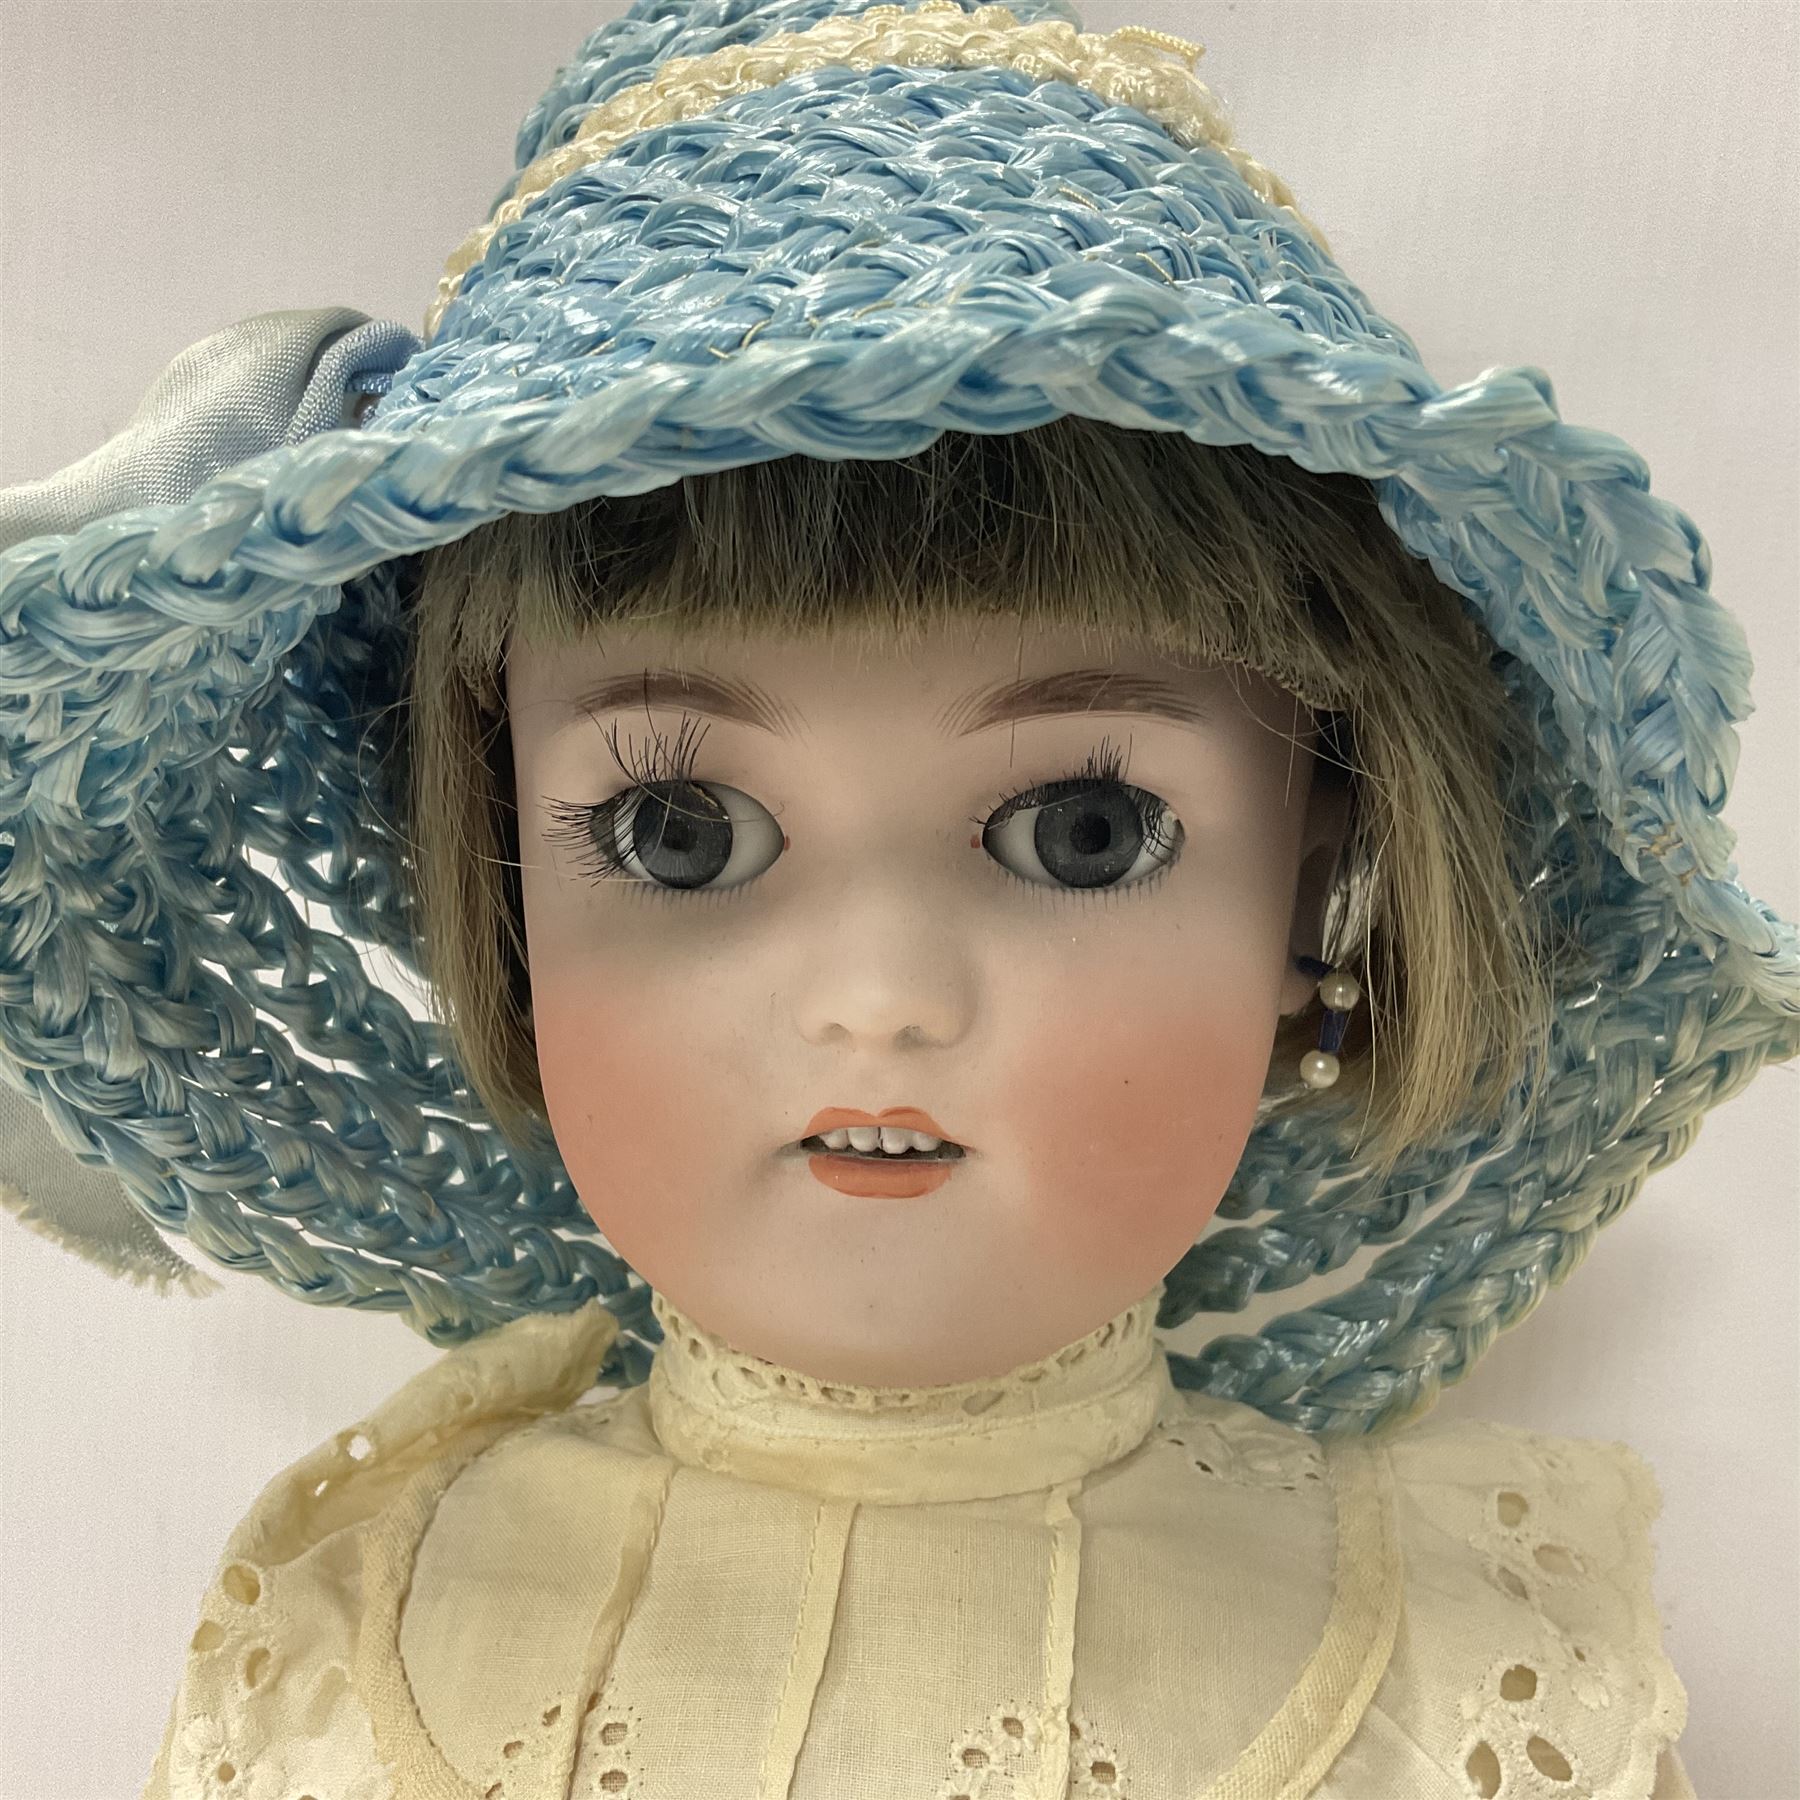 Simon & Halbig bisque head doll with applied hair - Image 2 of 13